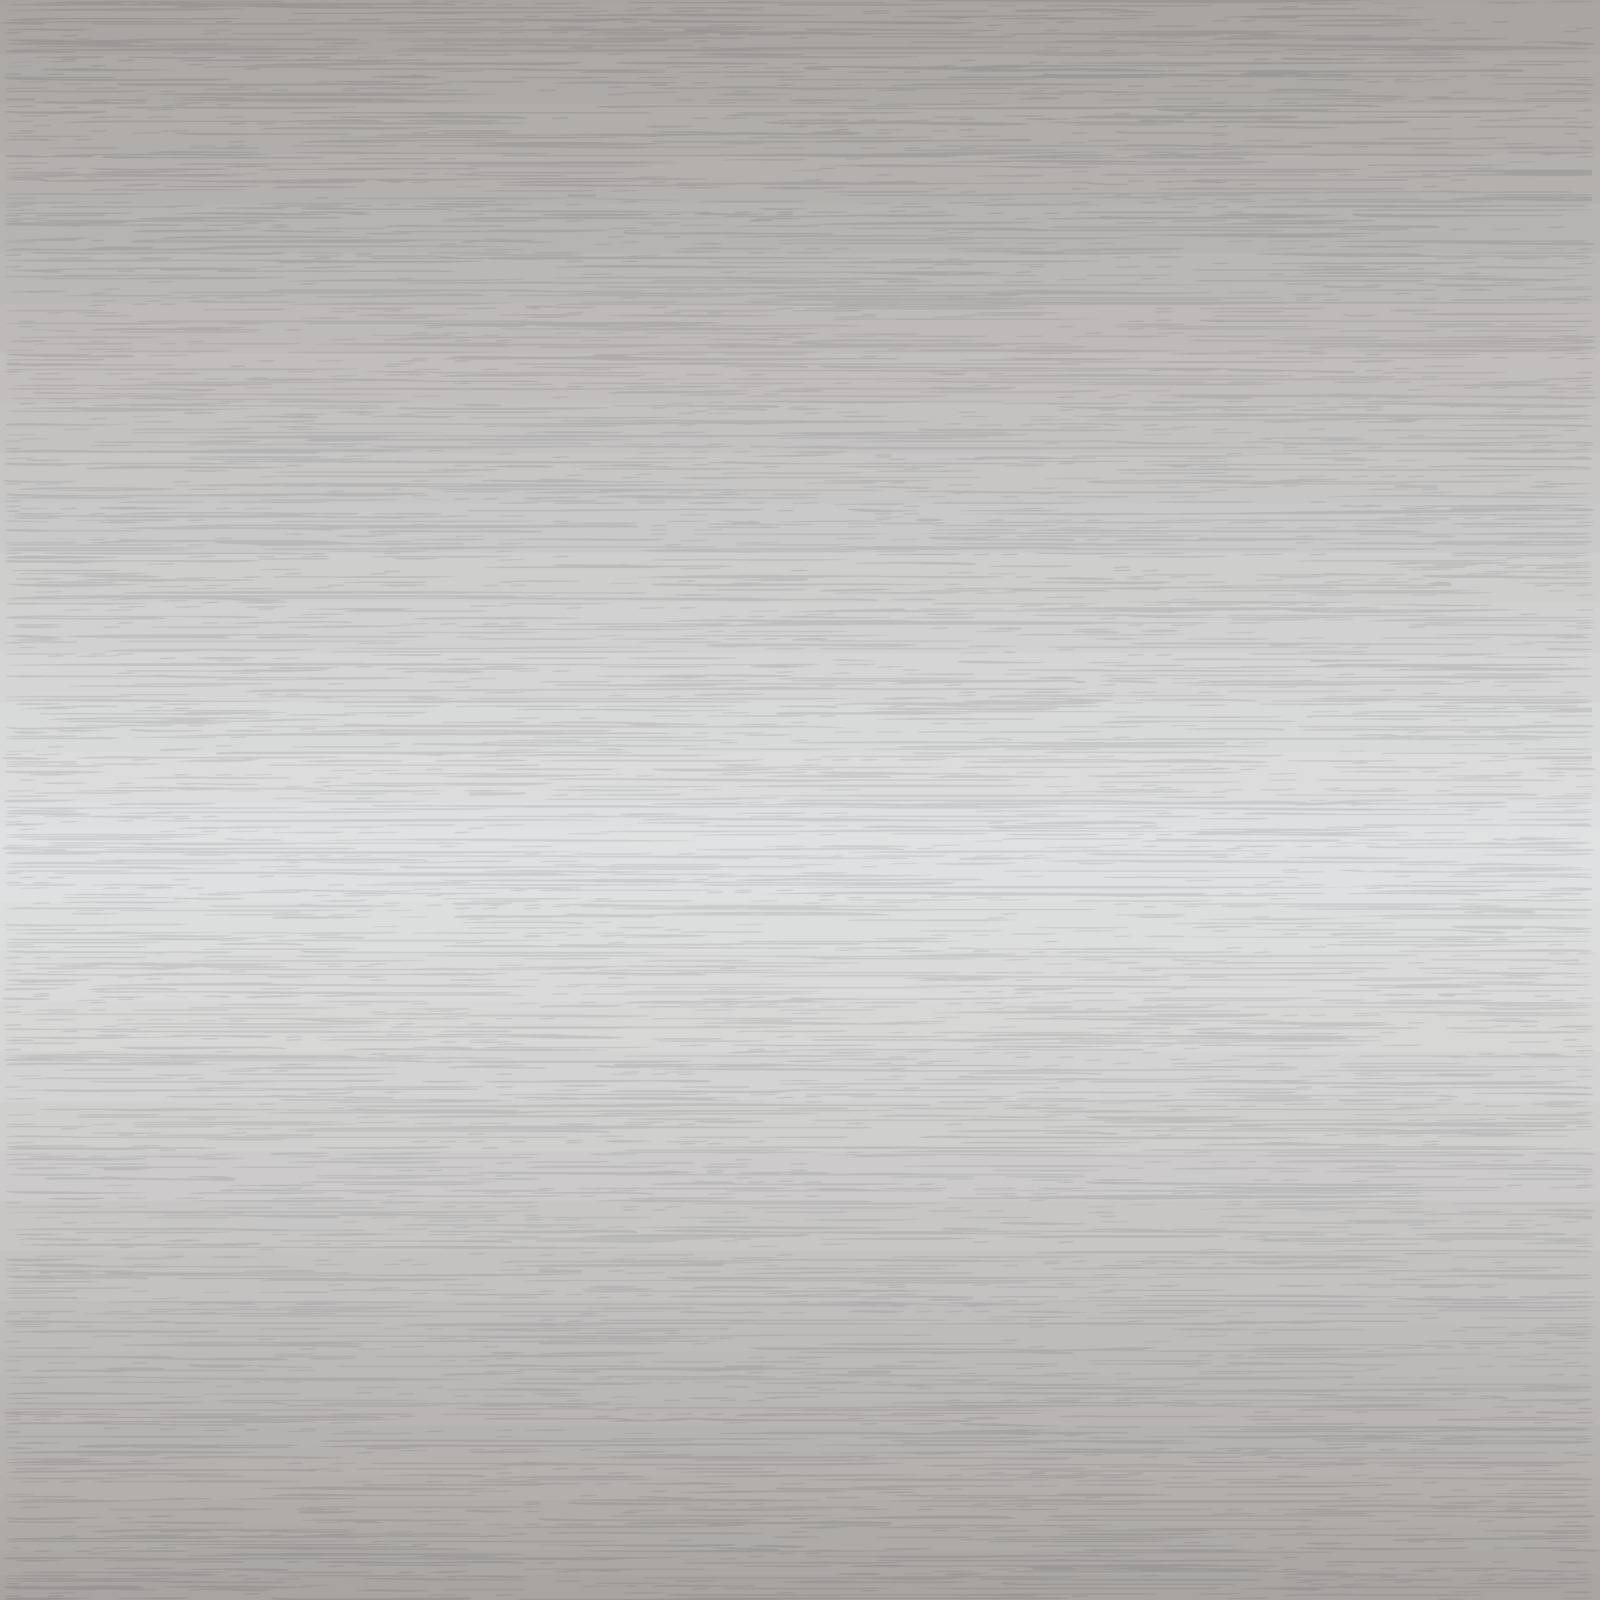 background or texture of brushed steel surface